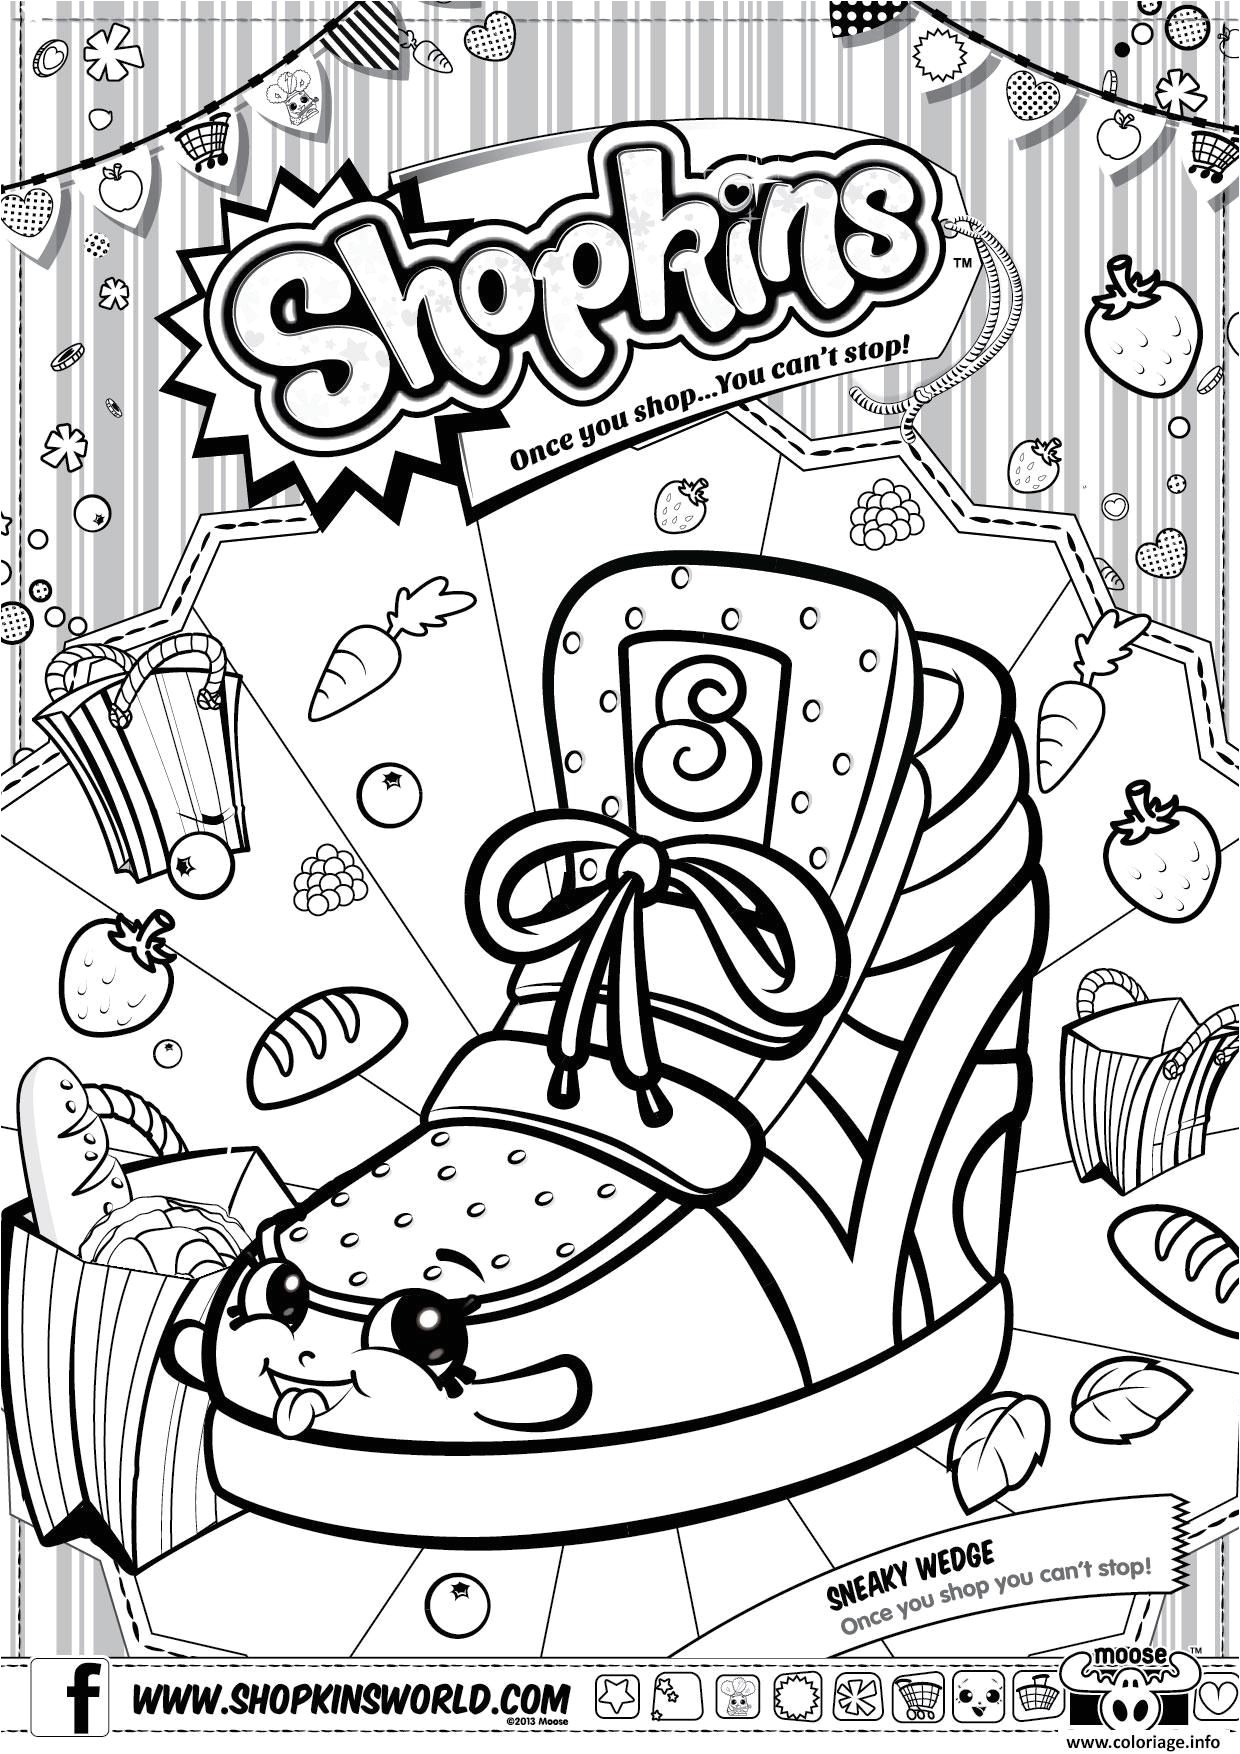 Coloriage De Shopkins Saison 5 Pin by Kay Mynch On Coloring Pages Pinterest